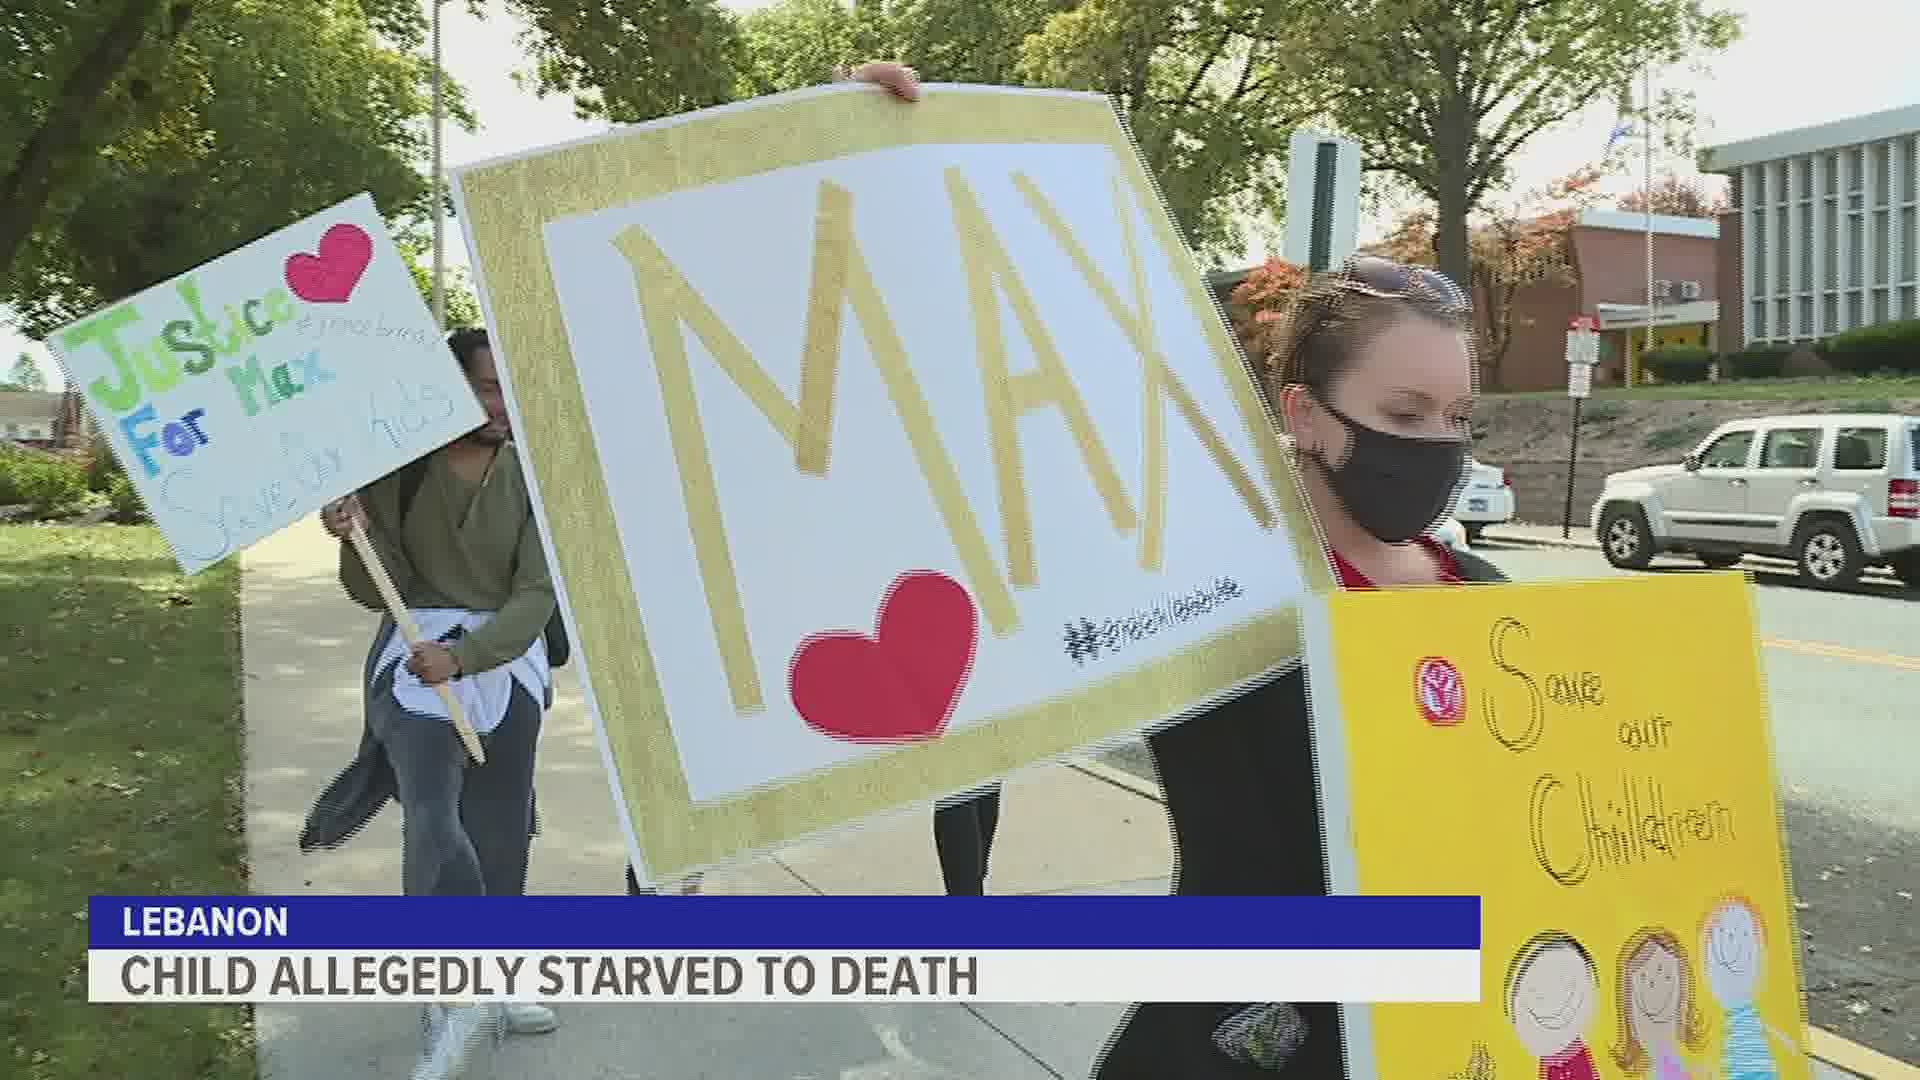 The demonstration will coincide with hearings in which Max's father, Scott Schollenberger, and his father's fiance, Kim Maurer, will enter pleas in the case.